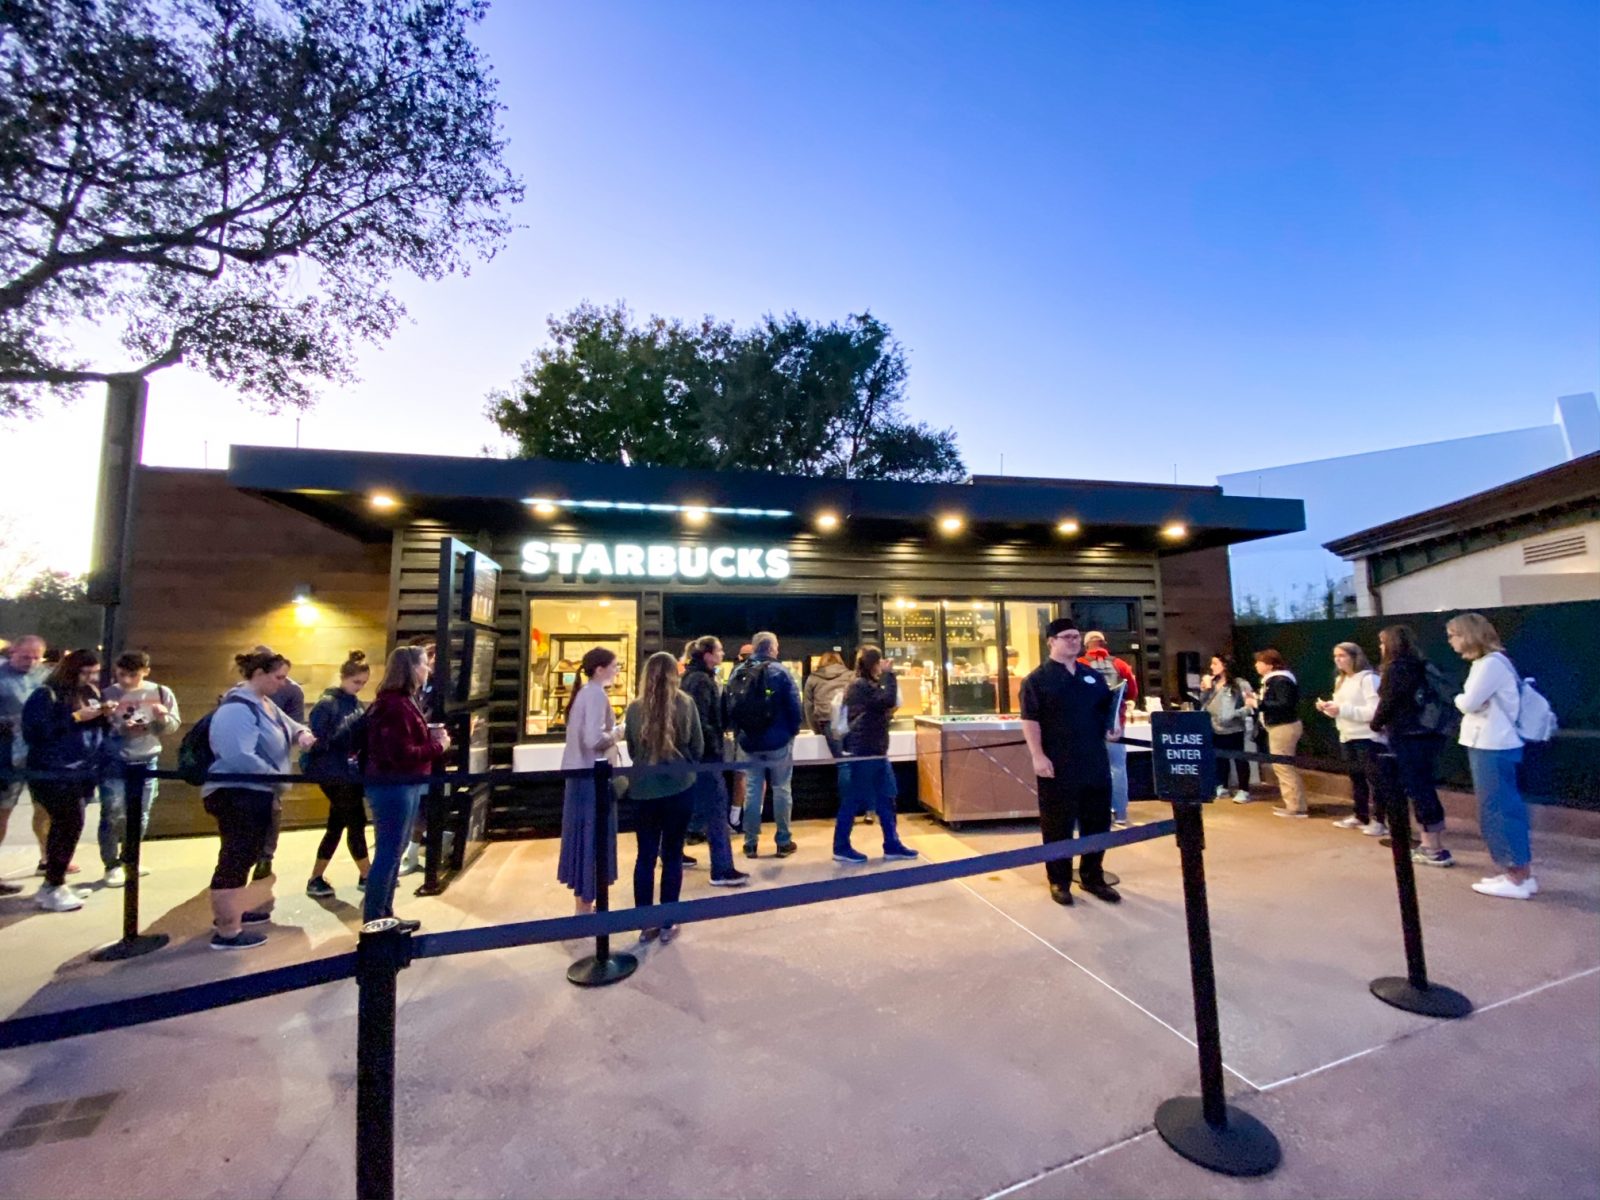 A small queue of patrons wait at the Epcot Starbucks kiosk, a modern and efficient design.